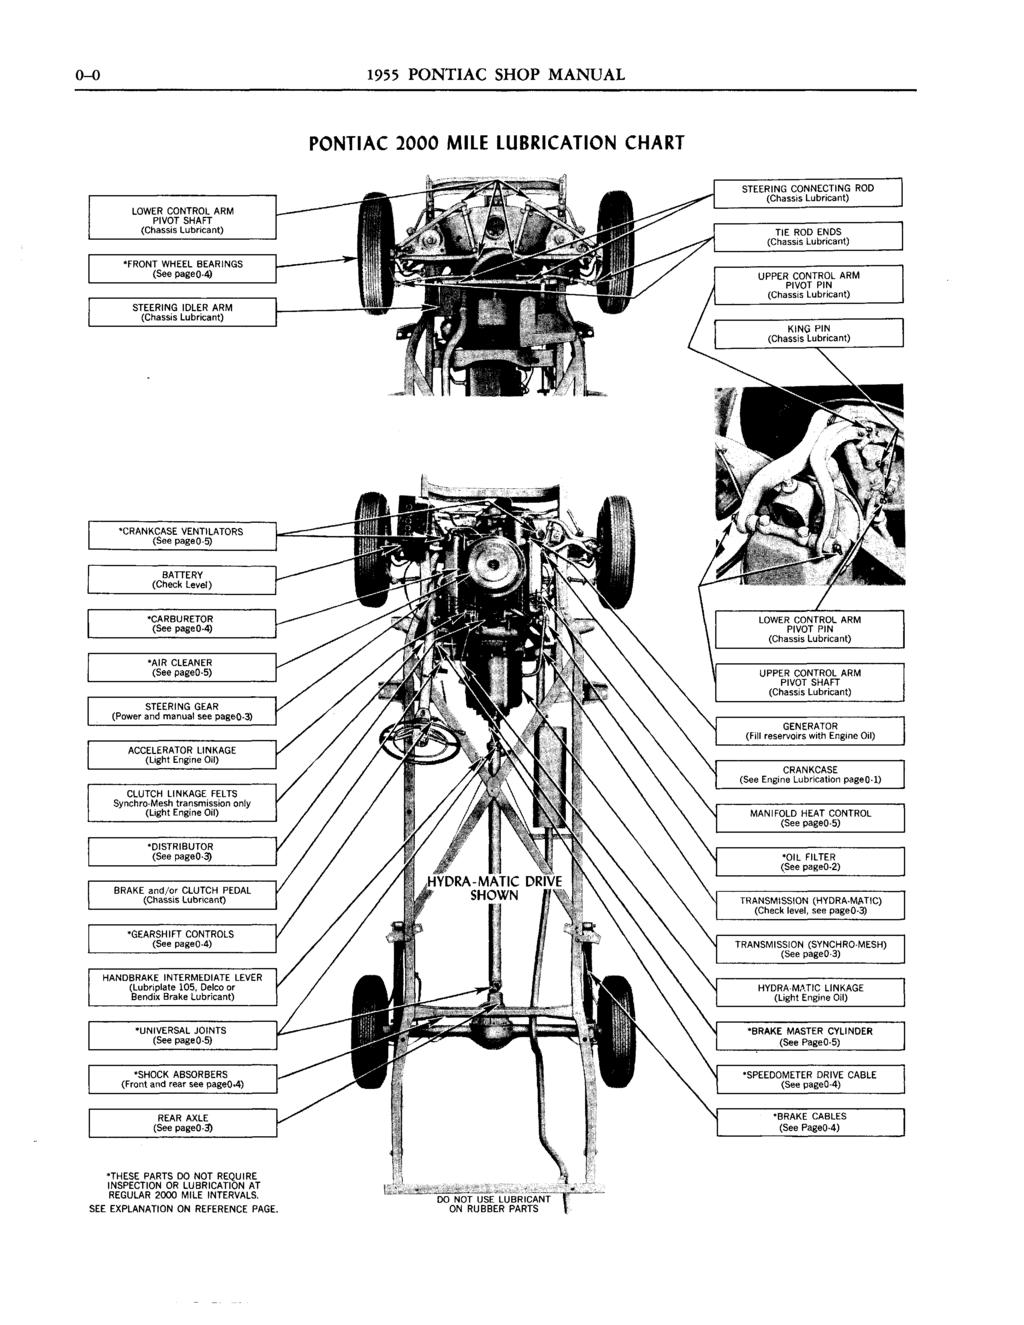 0-0 1955 PONTIAC SHOP MANUAL PONTIAC 2000 MILE LUBRICATION CHART LOWER CONTROL ARM PIVOT SHAFT 'FRONT WHEEL BEARINGS (See pageo-4) STEERING IDLER ARM STEERING CONNECTtNG ROD TIE ROD ENDS UPPER